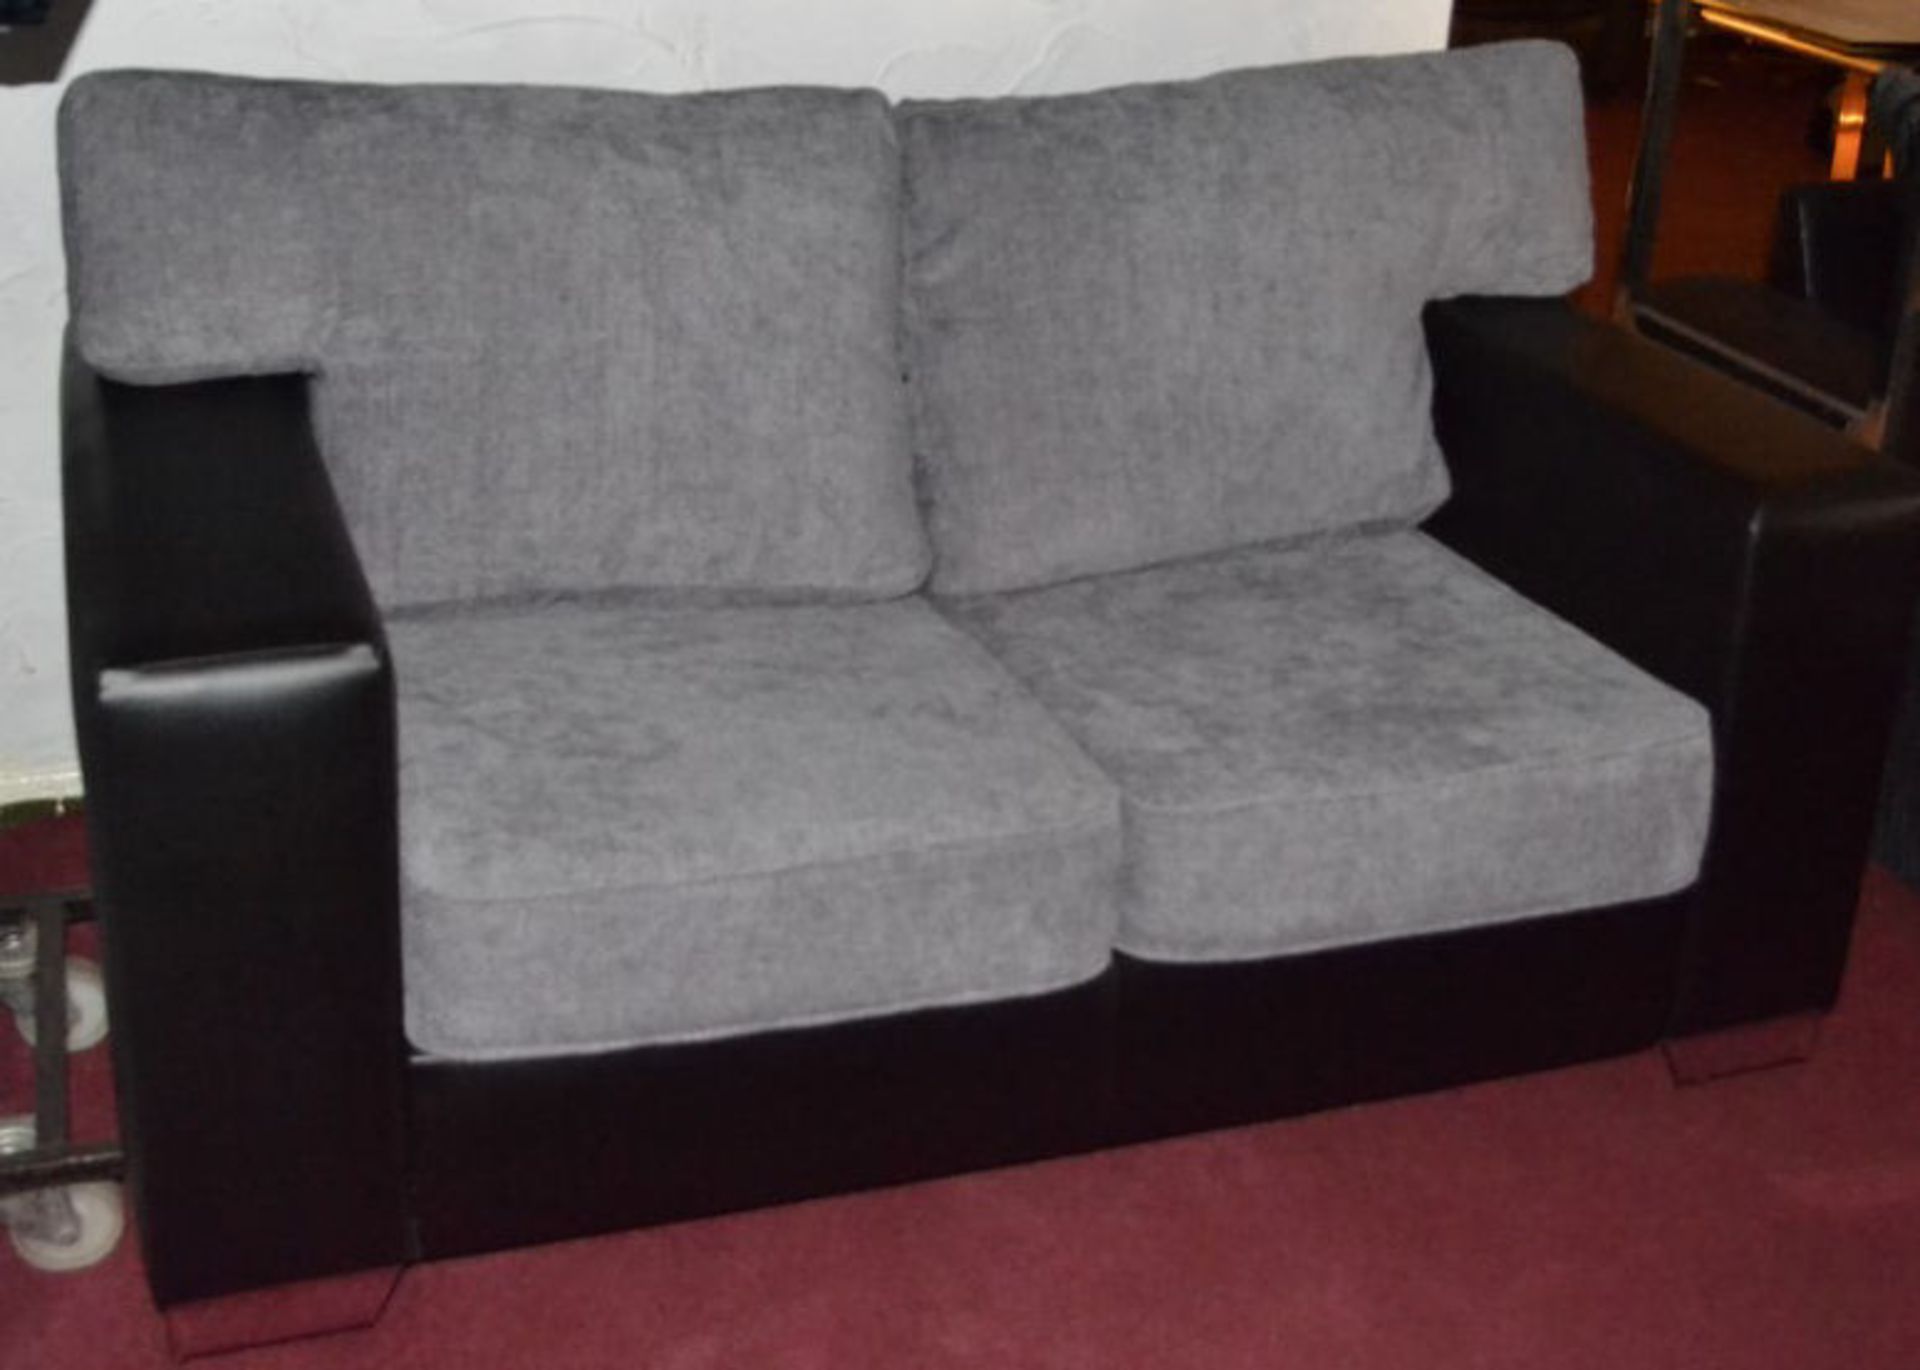 1 x 2-Seater Sofa In Black Faux Leather With Grey Fabric Cushions